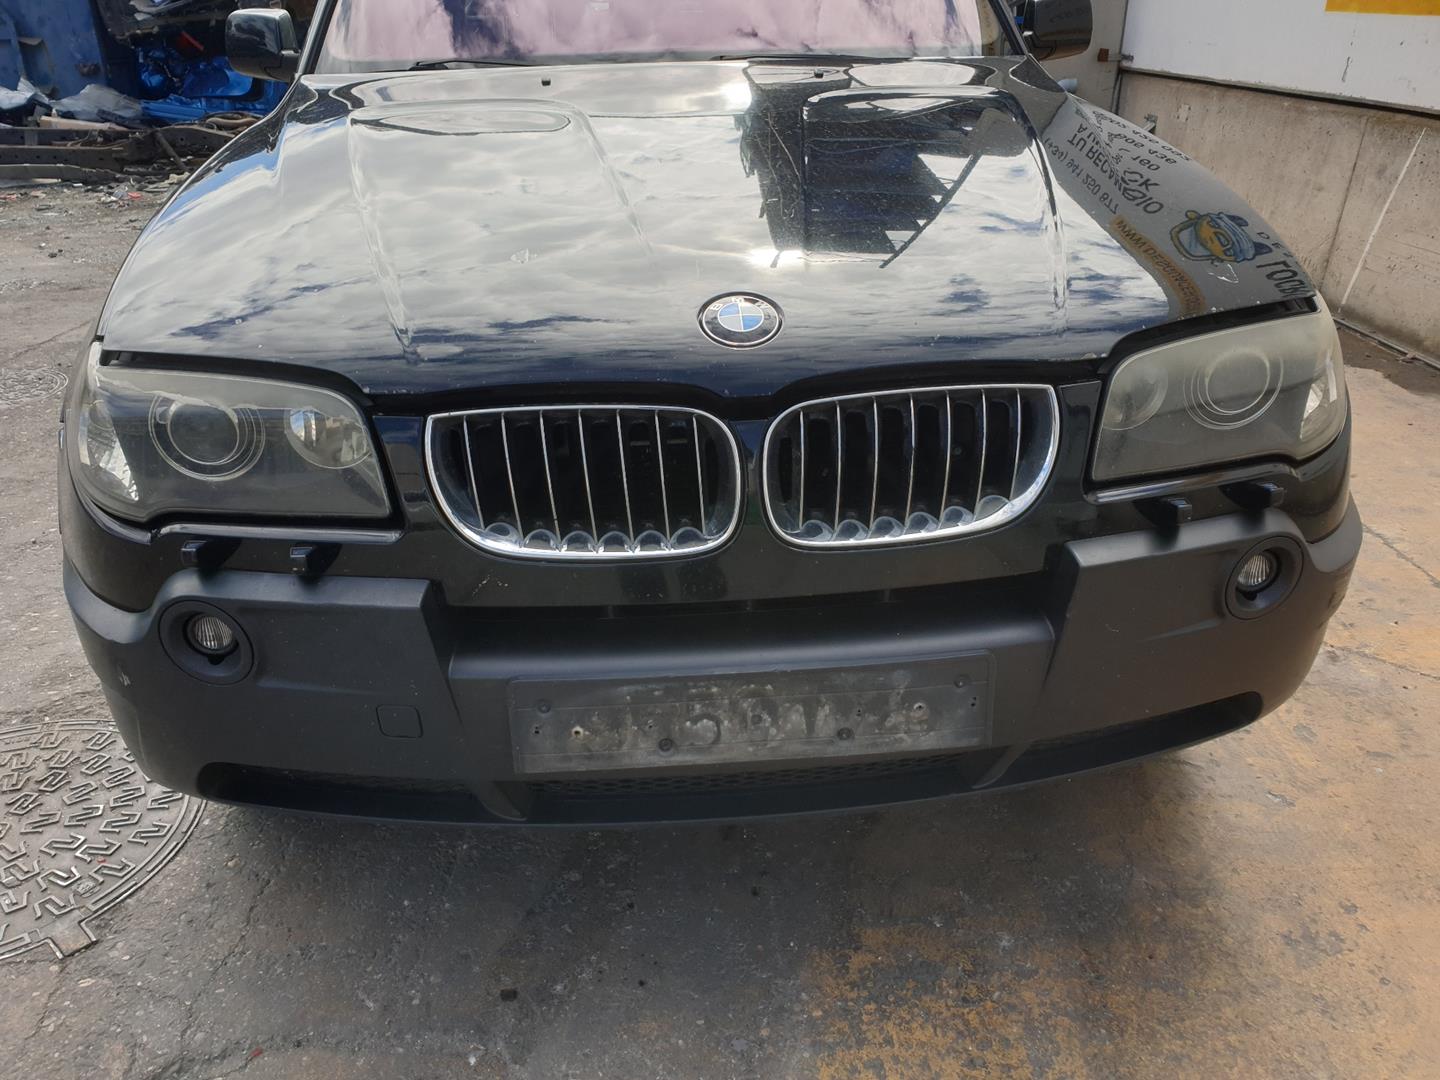 BMW X3 E83 (2003-2010) Other Body Parts 51243400379, 51243400379 21074370